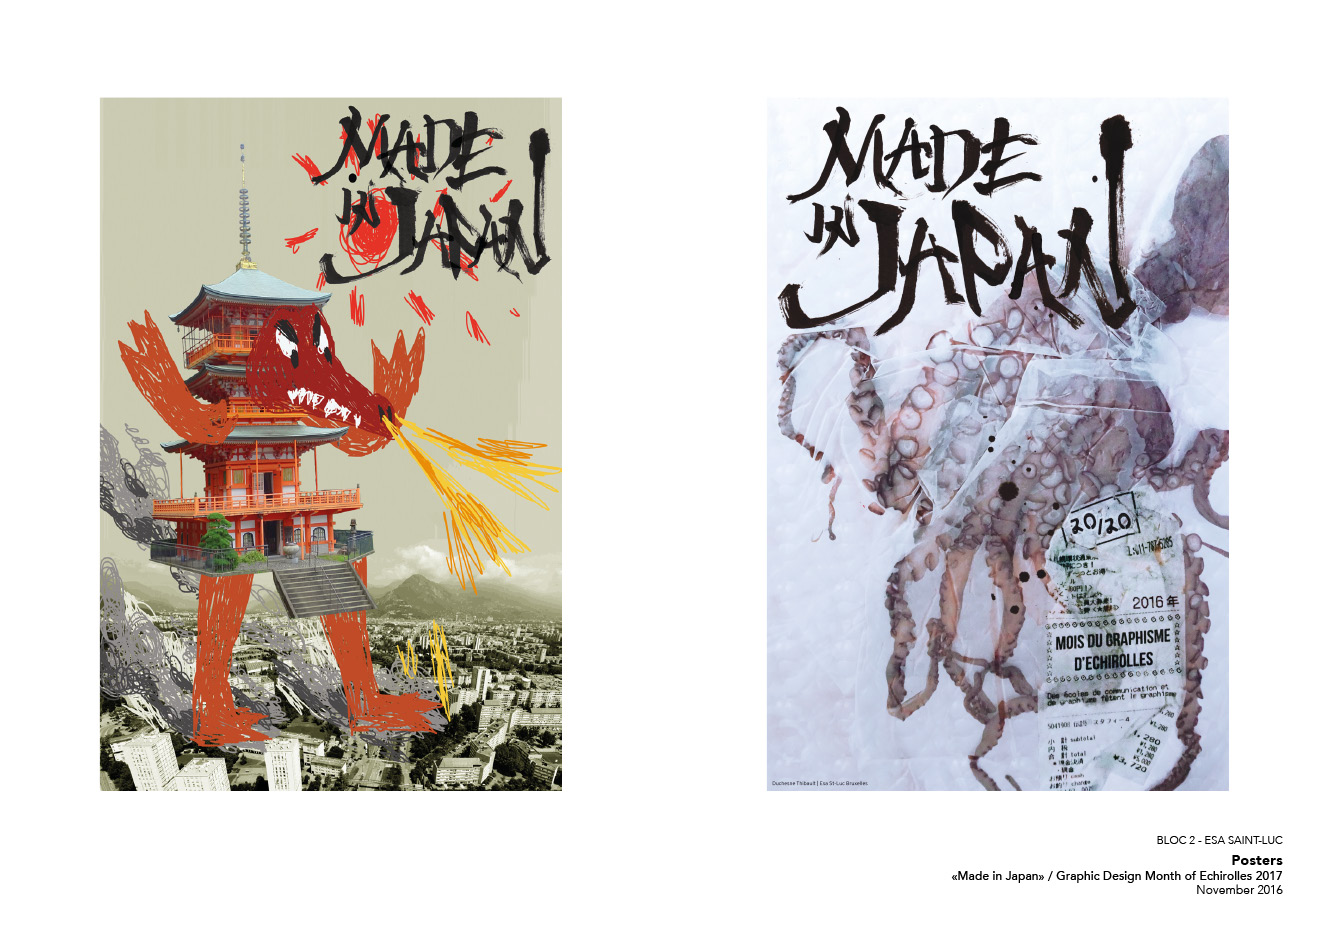 Posters "Le mois du Graphisme d'chirolles / Made in Japan"